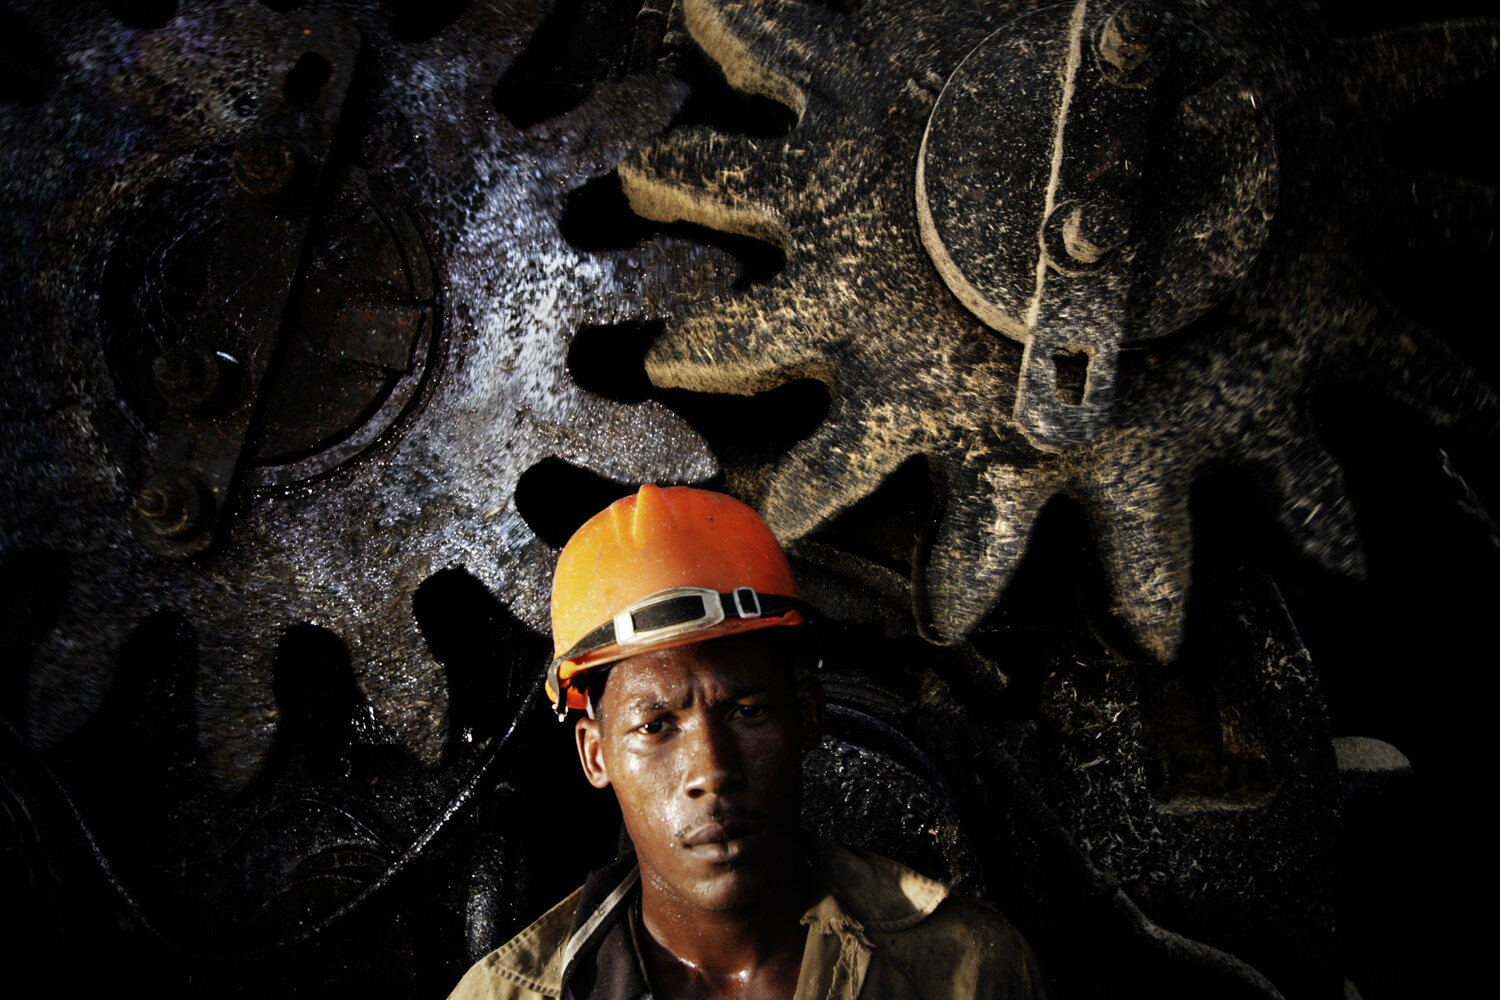  Yoandri, 28, poses for a portrait  in front of giant cogwheels in a sugarcane factory. Duani has been working for 2 year  in the sugarcane industry.  